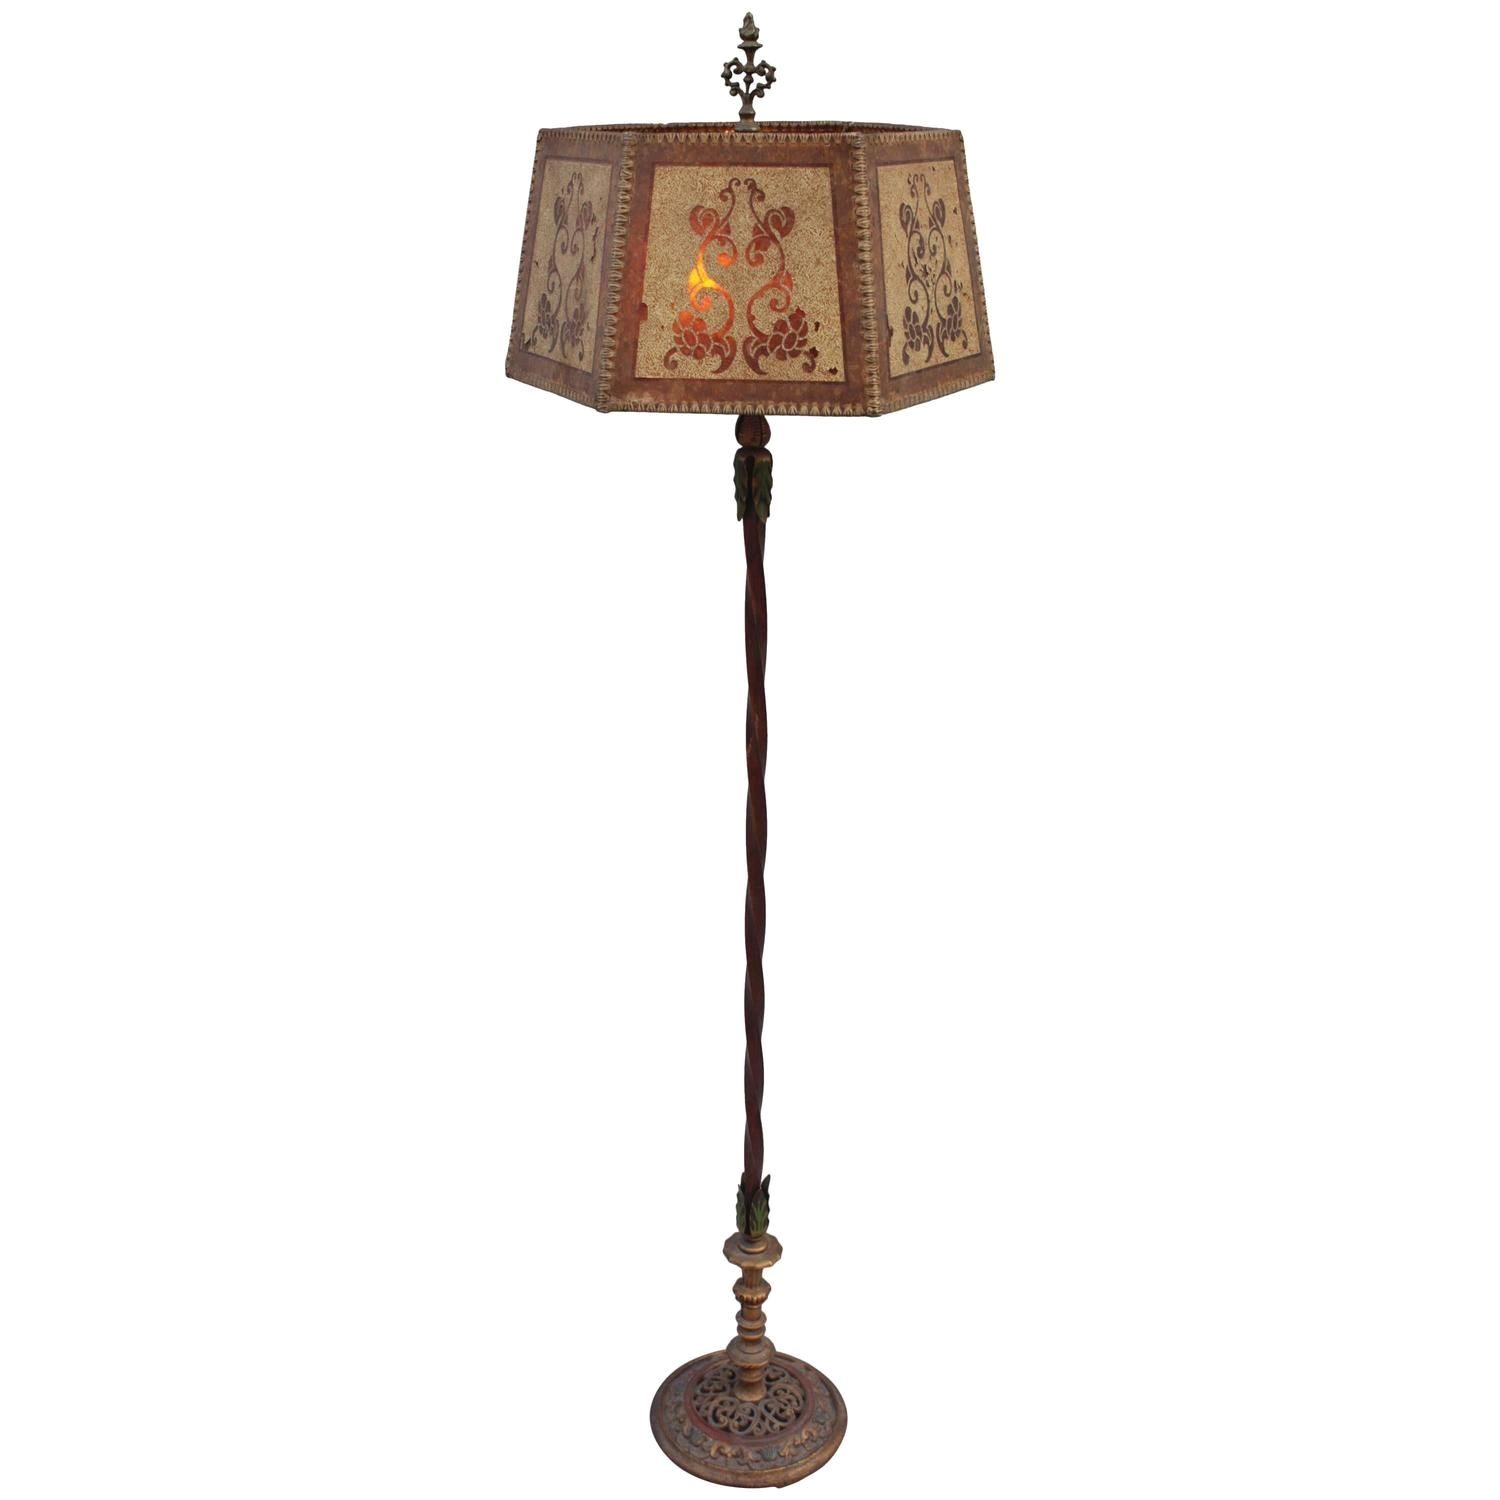 1920s elegant spanish revival floor lamp from a unique collection of antique and modern floor lamps at